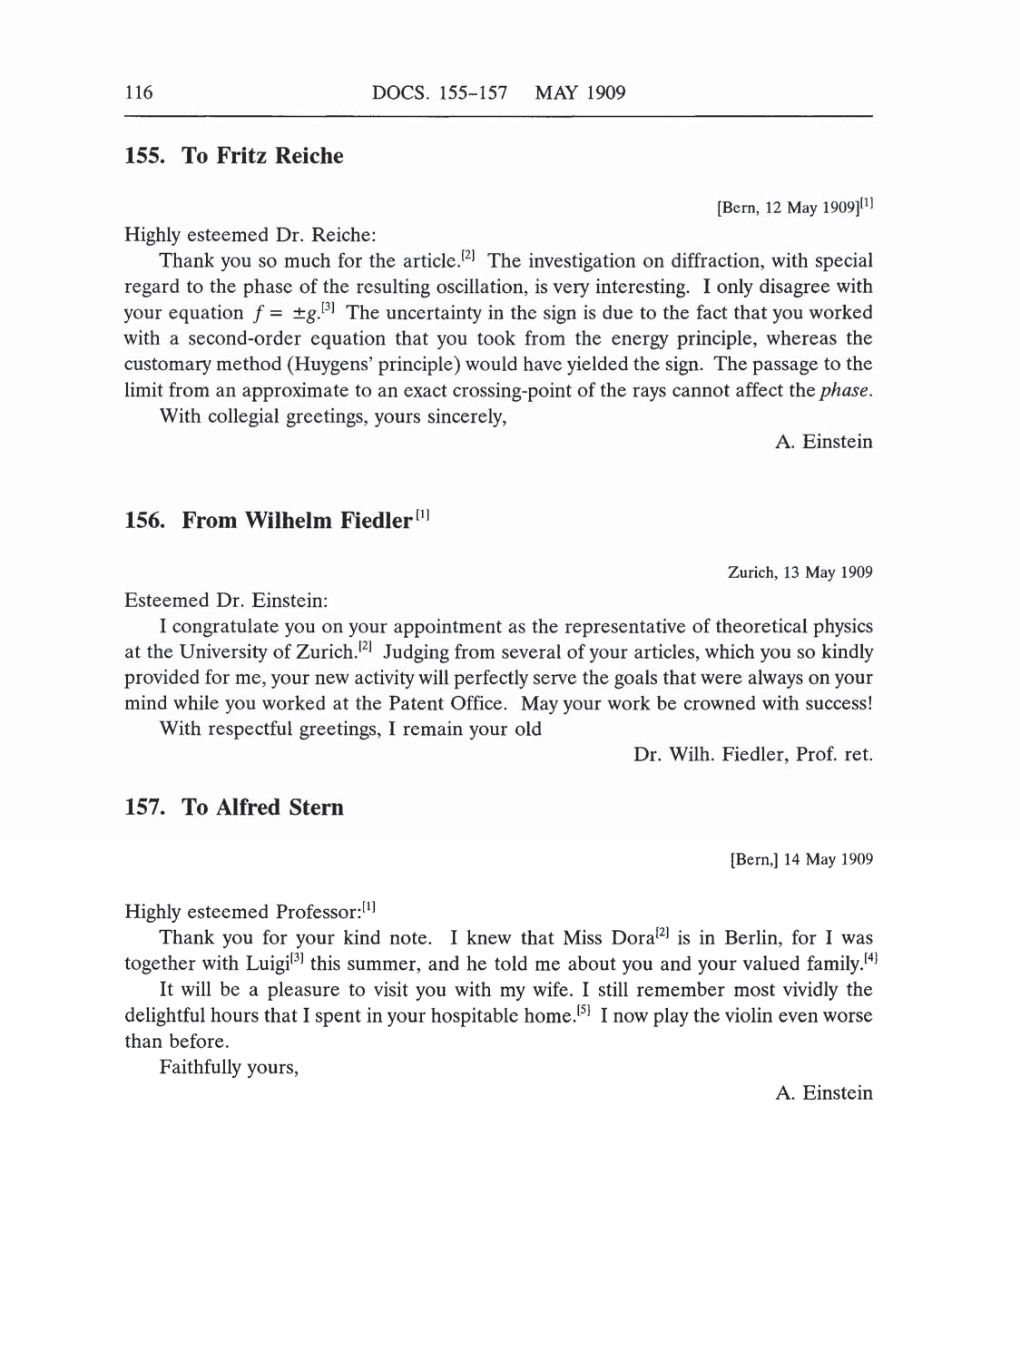 Volume 5: The Swiss Years: Correspondence, 1902-1914 (English translation supplement) page 116